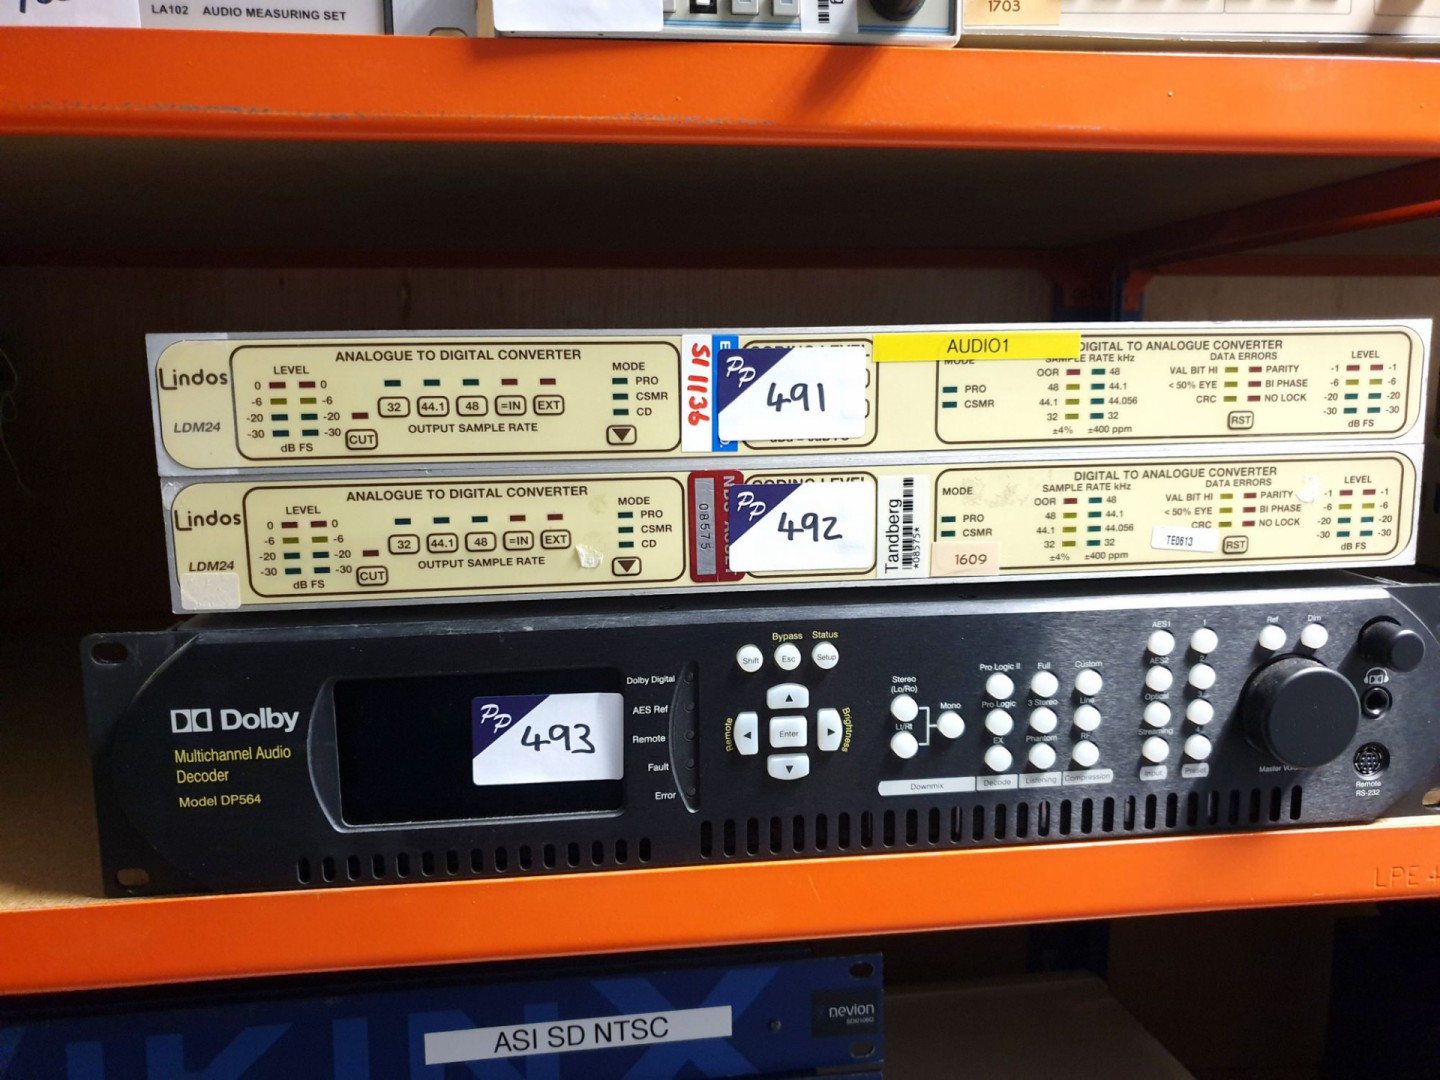 Dolby DP564 multi channel audio decoder